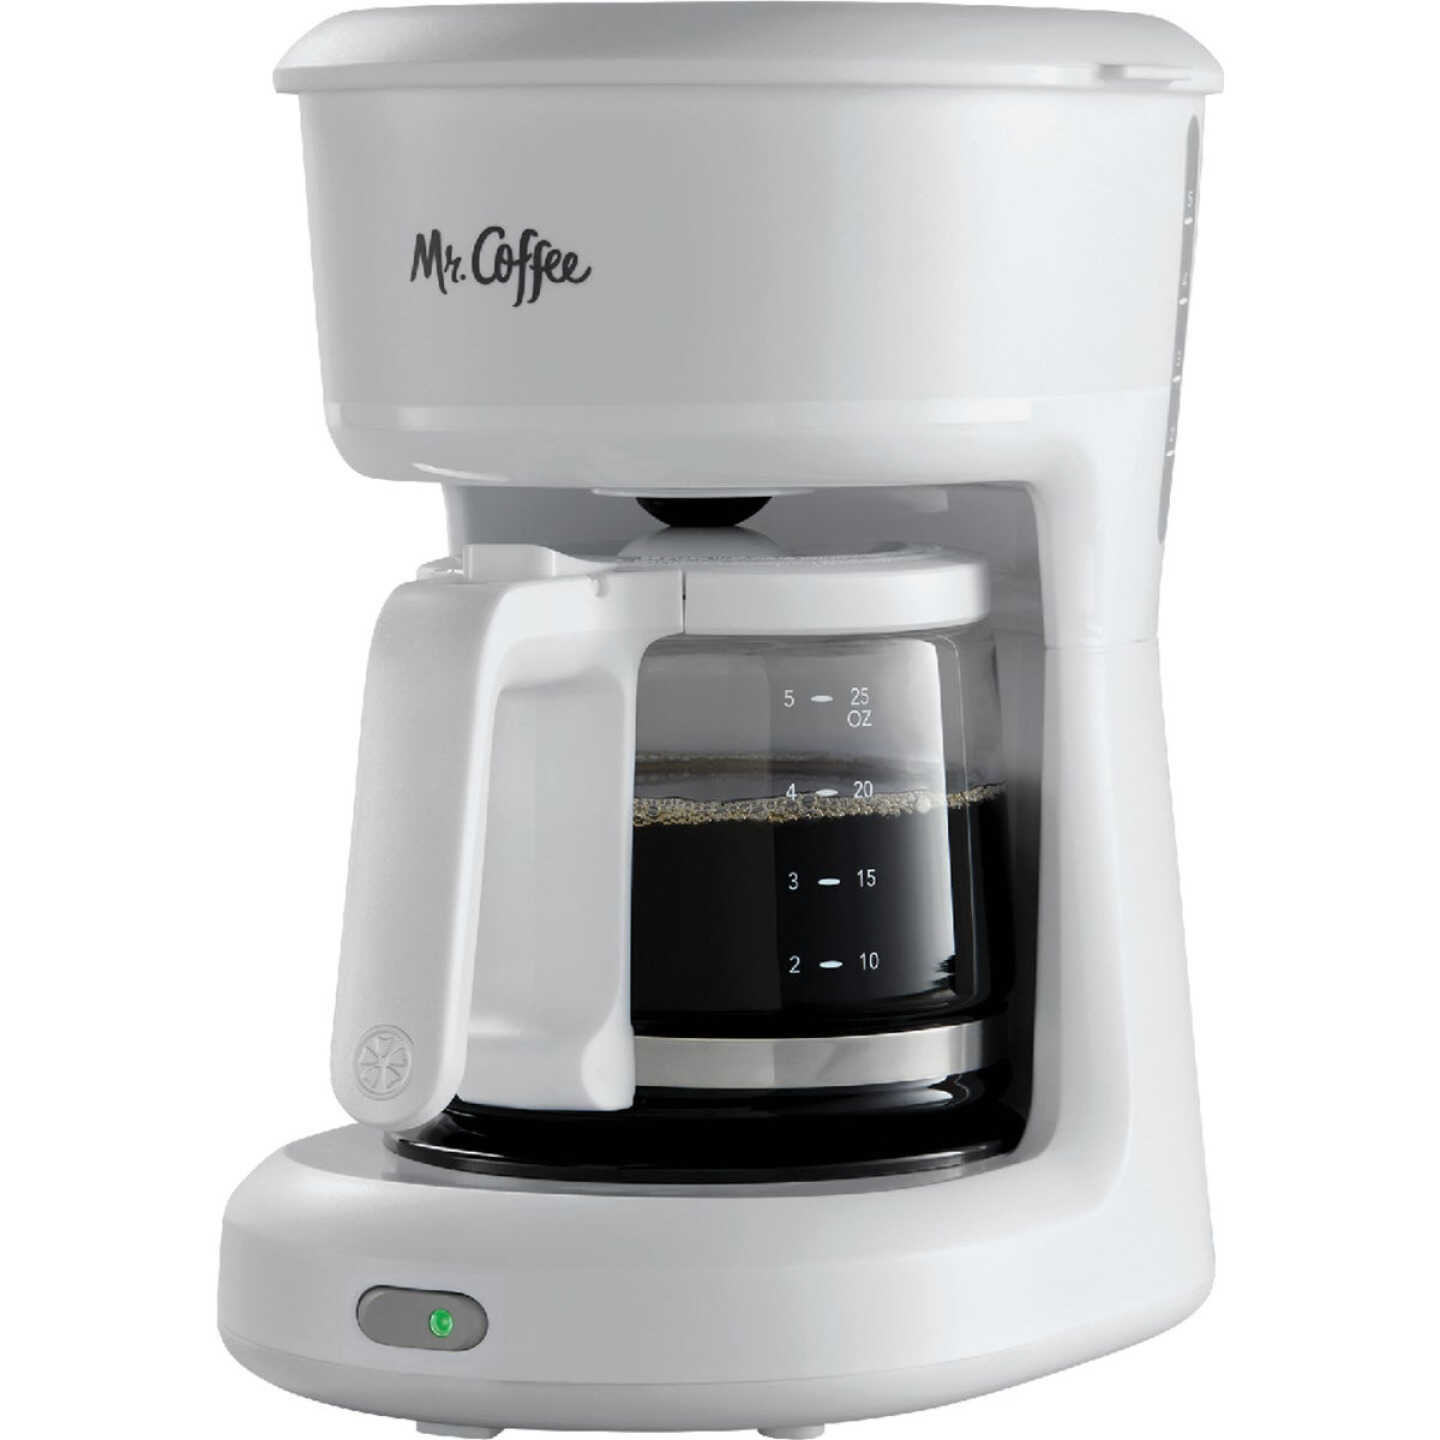 Mr. Coffee 5 Cup Programmable Black